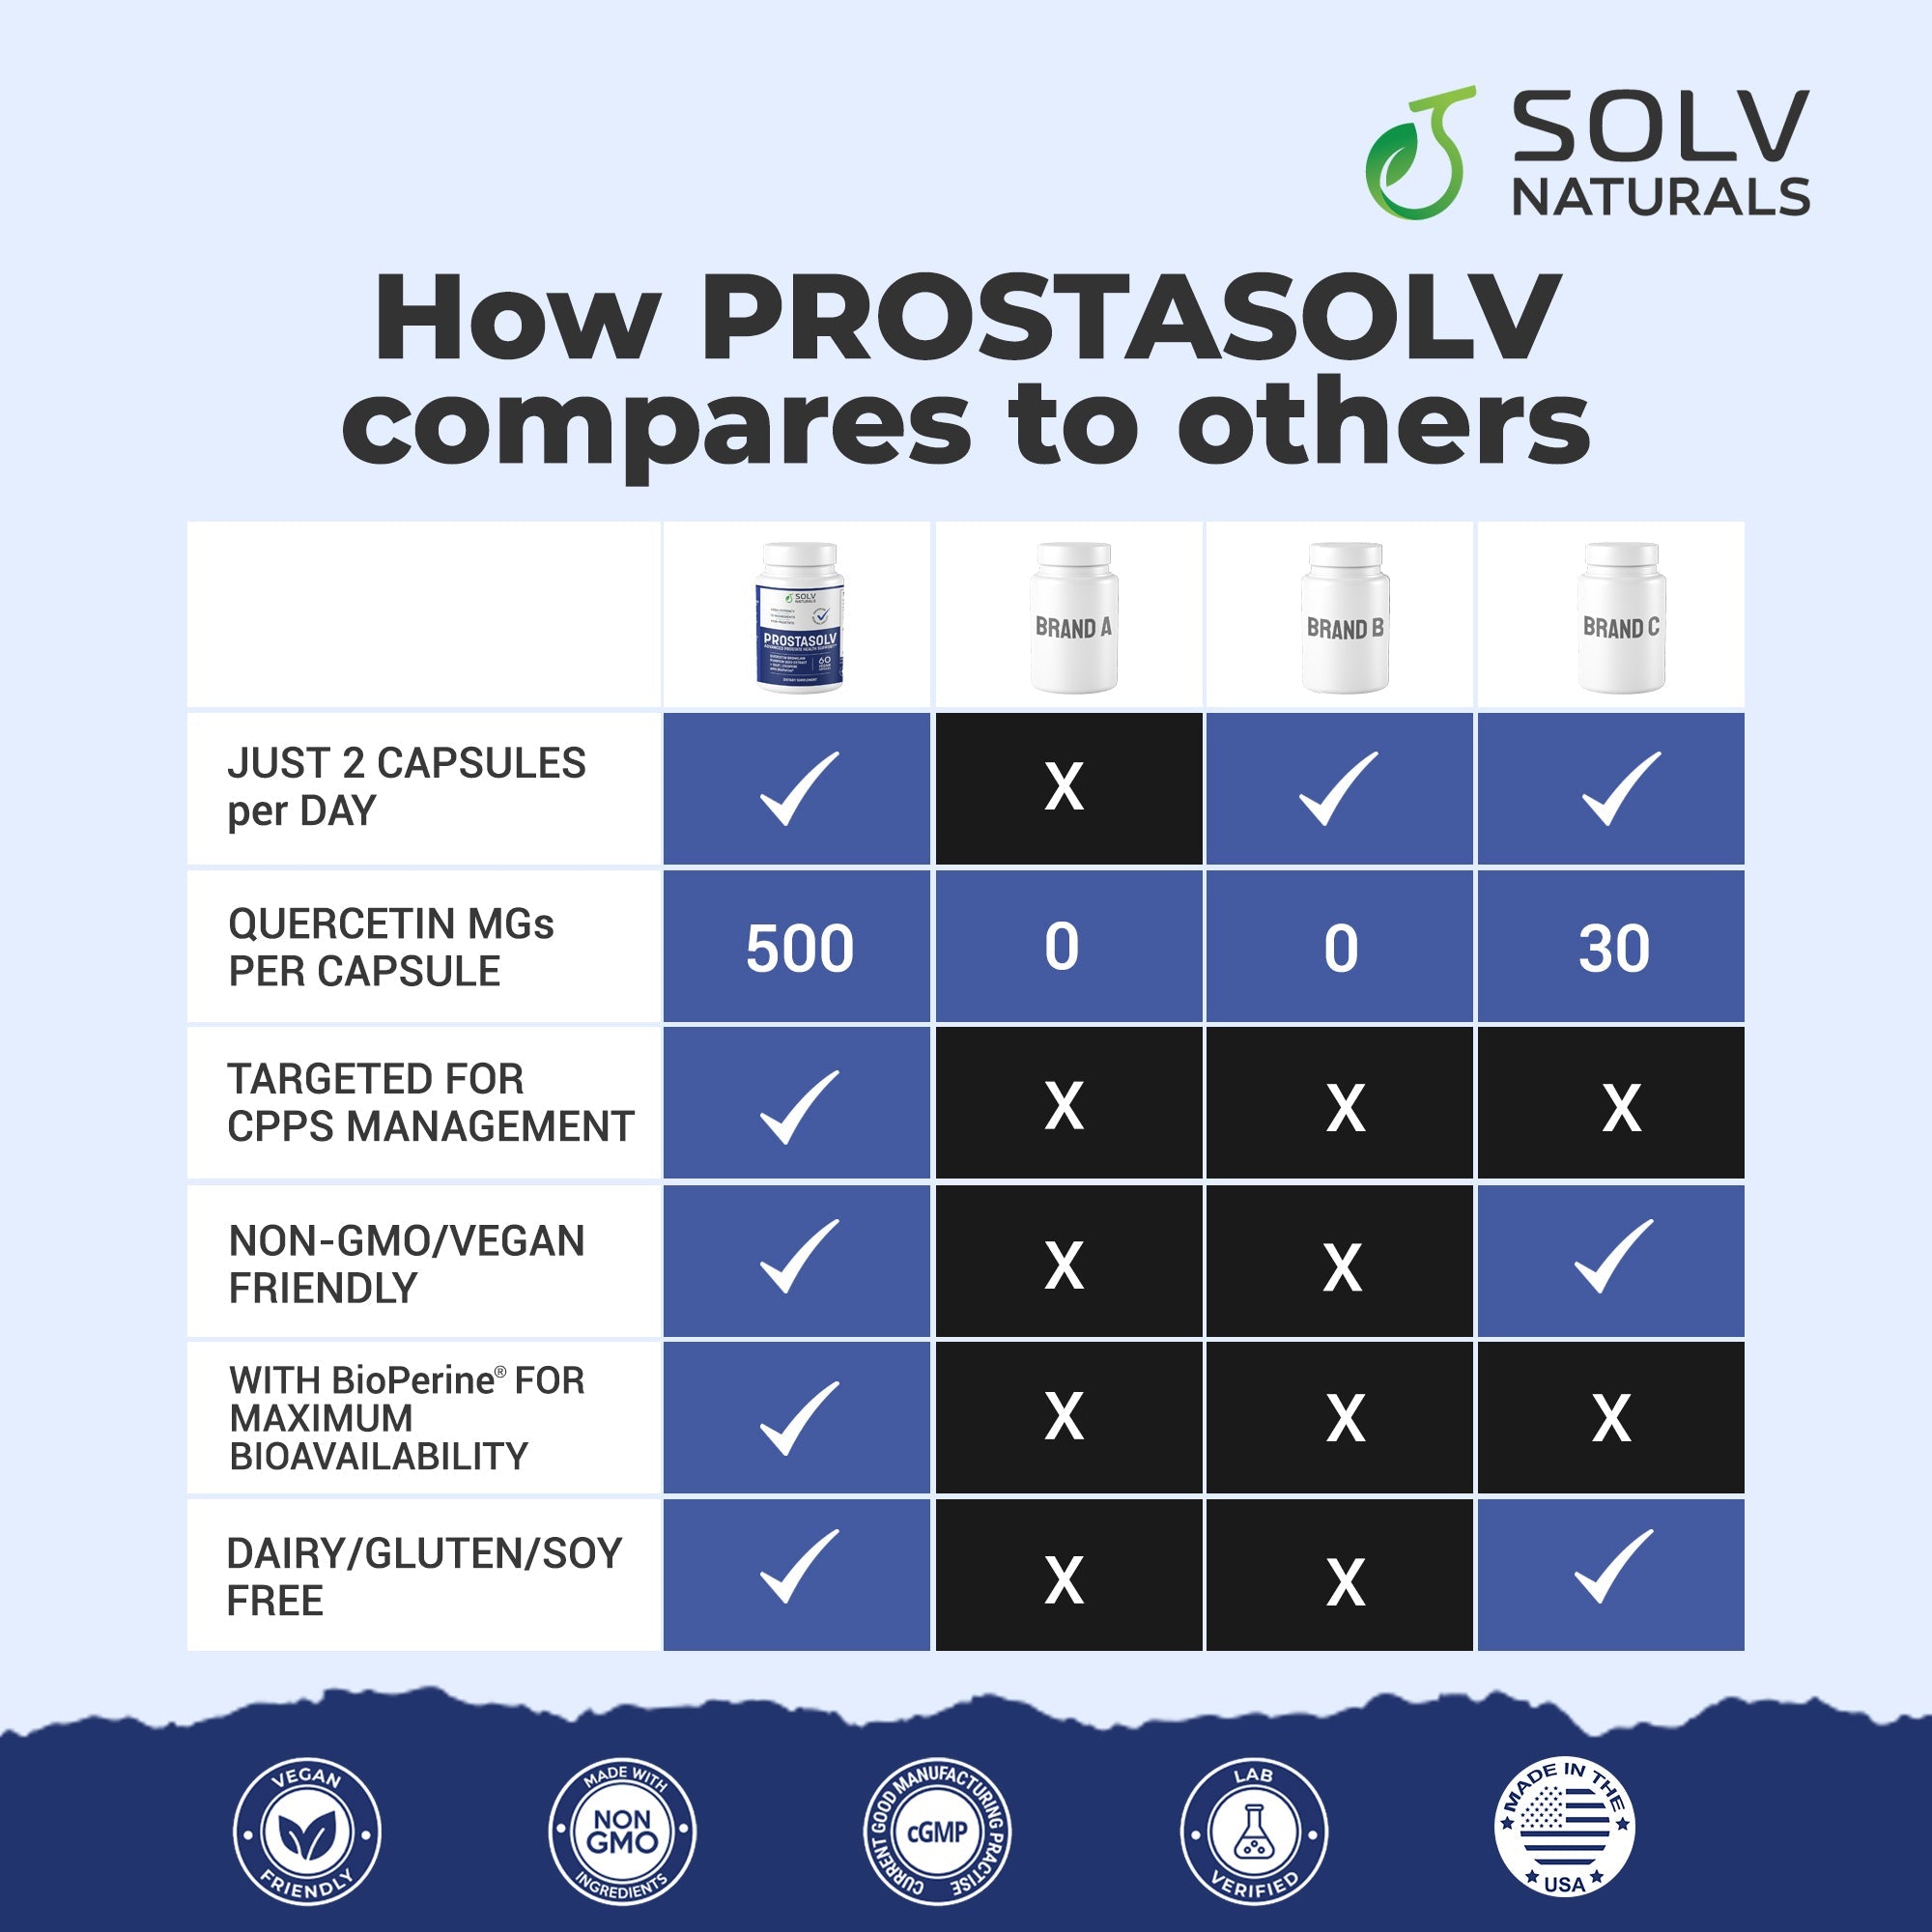 How PROSTASOLV compares to others